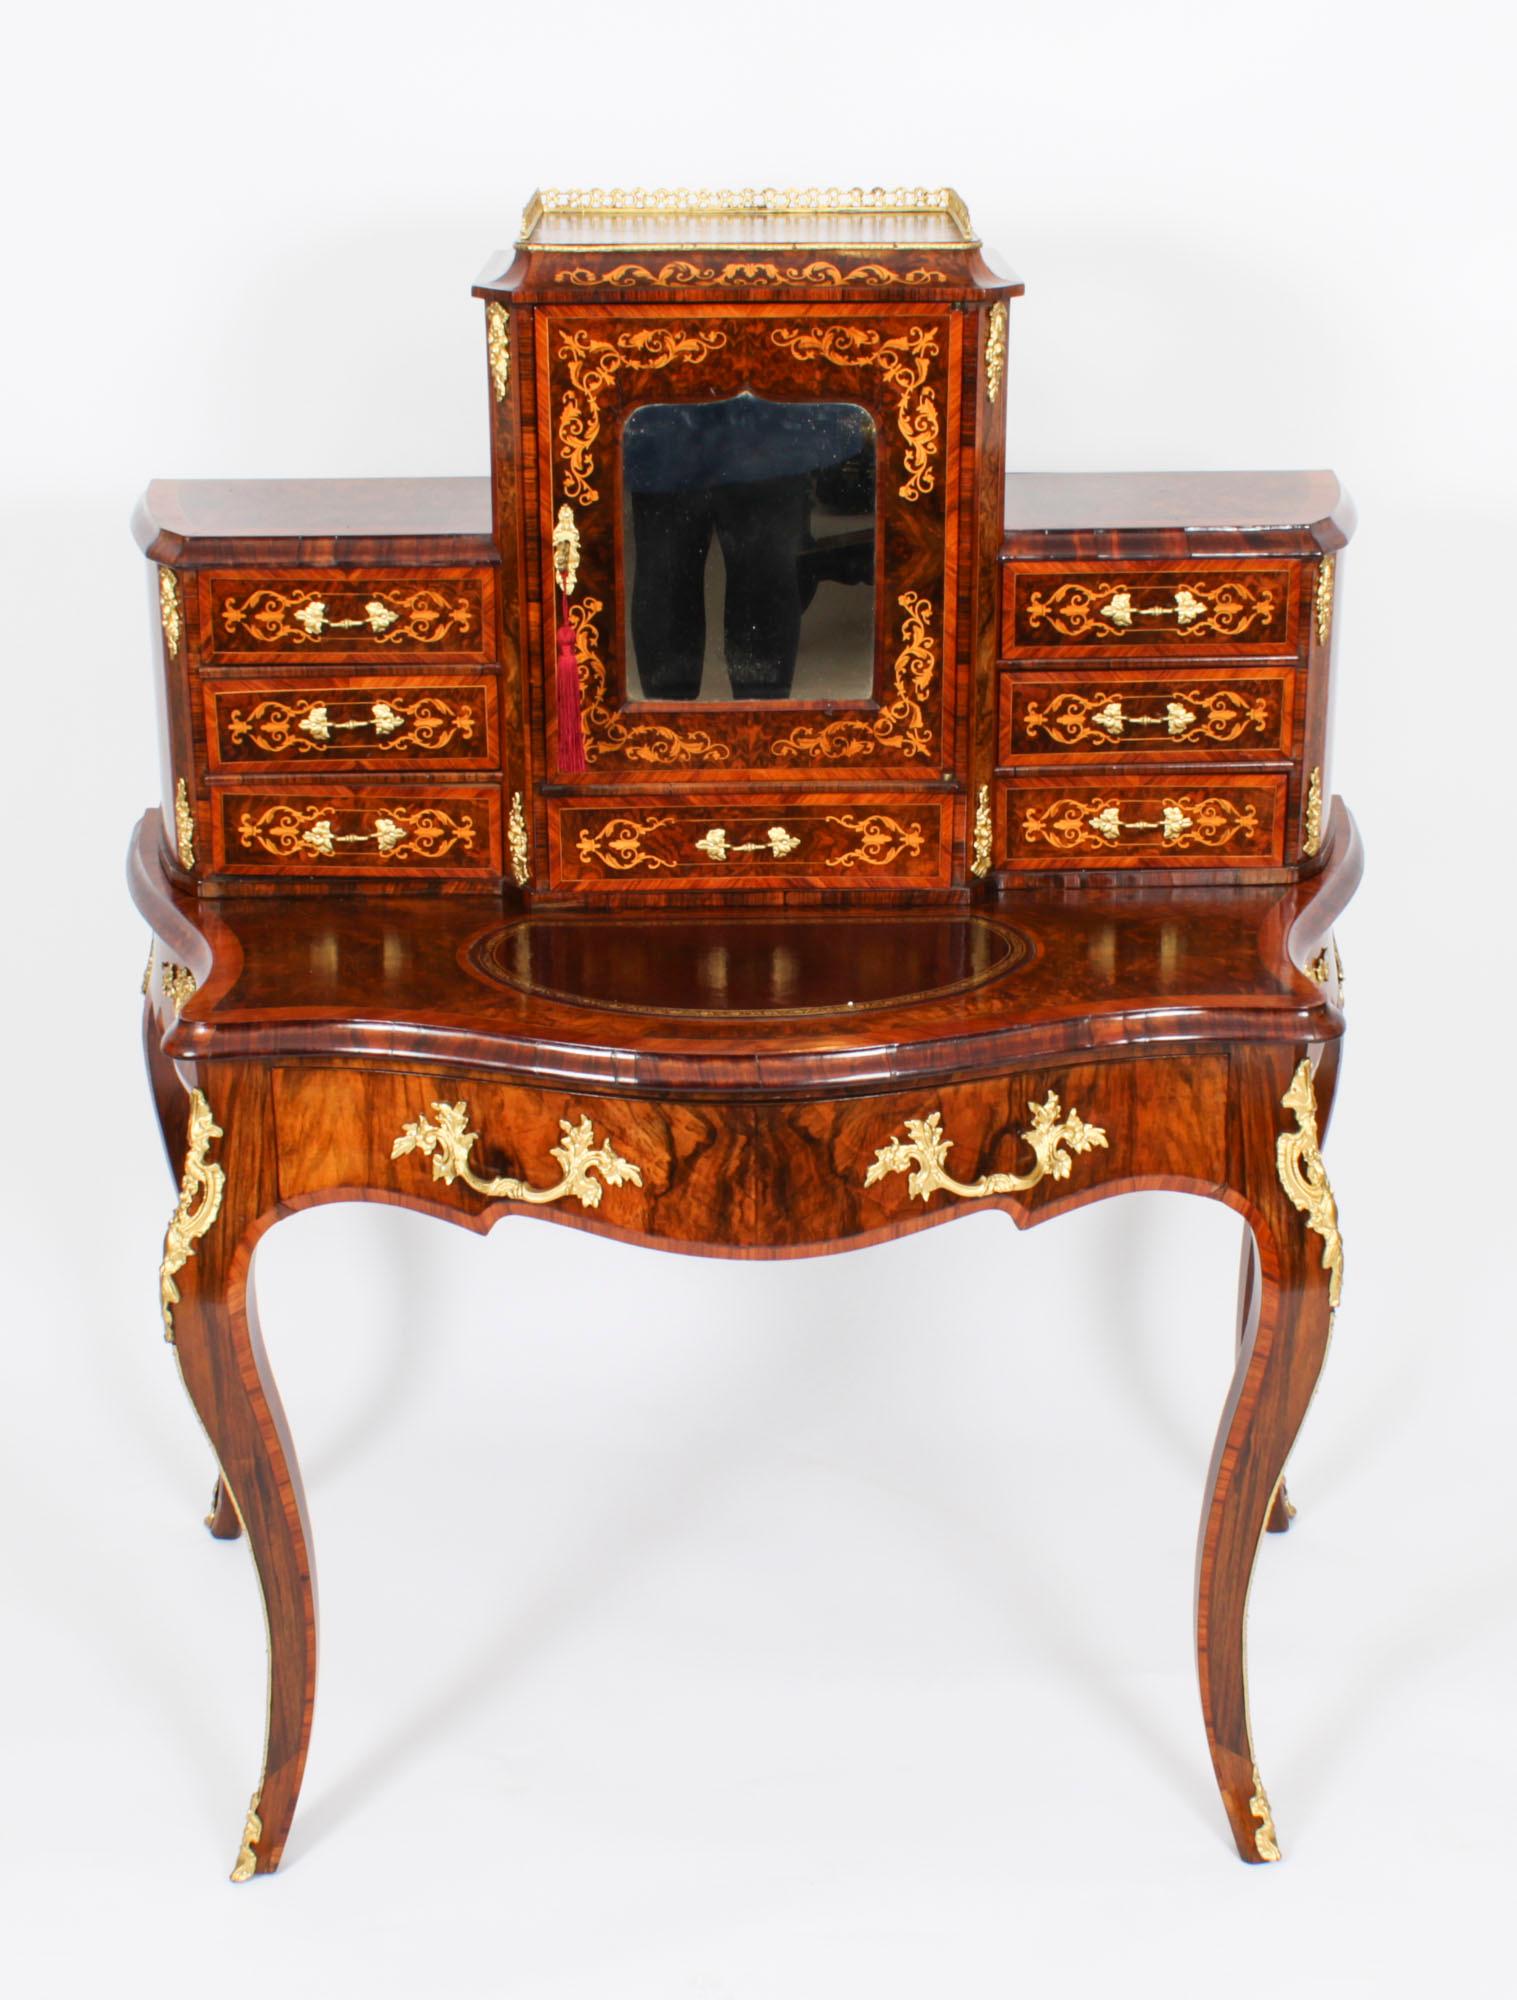 This is a elegant Victorian burr walnut and marquetry Bonheur Du Jour, or Ladies writing desk, circa 1860 in date. 

The superstructure comprises a large central bay with a mirror inset door and a three quarter brass gallery above. The door opens to